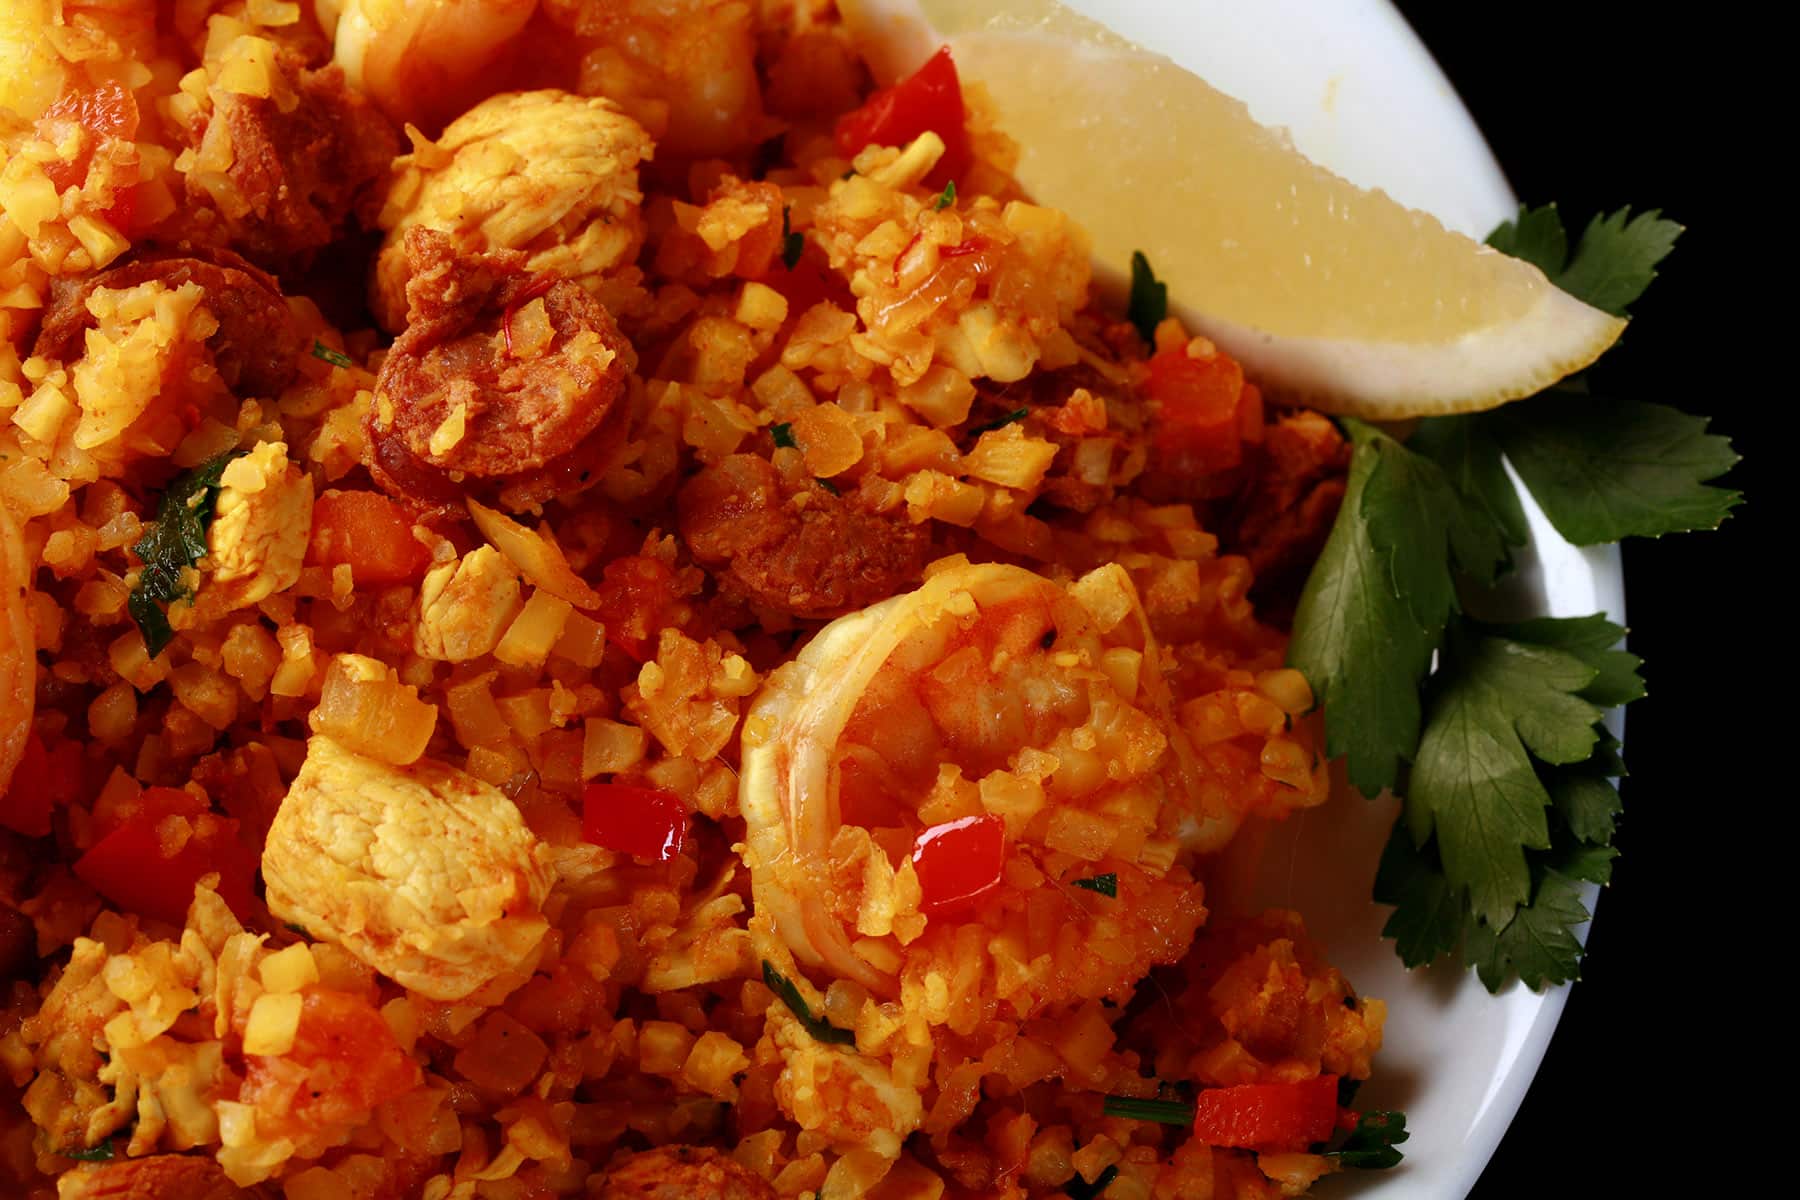 A bowl of low carb paella, with shrimp, chicken, and chorizo visible.